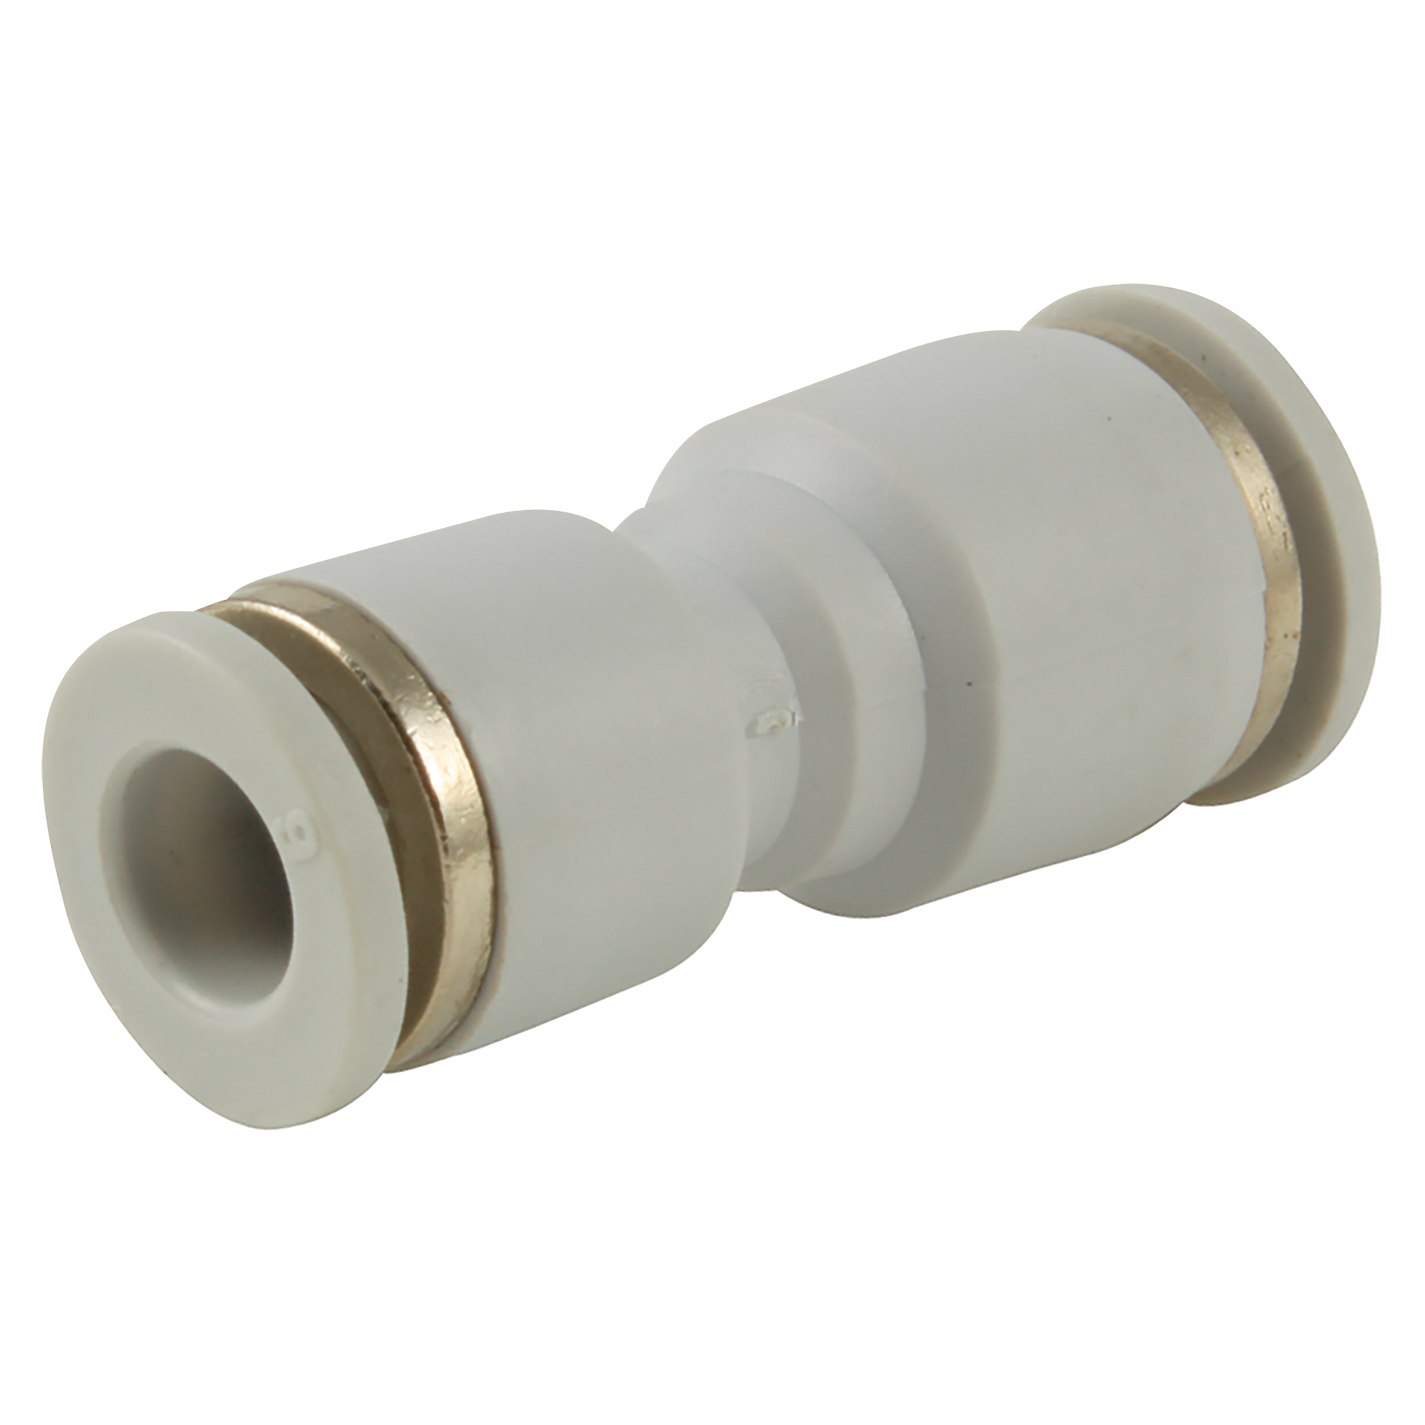 10mm OD x 6mm OD Reducing Straight connector